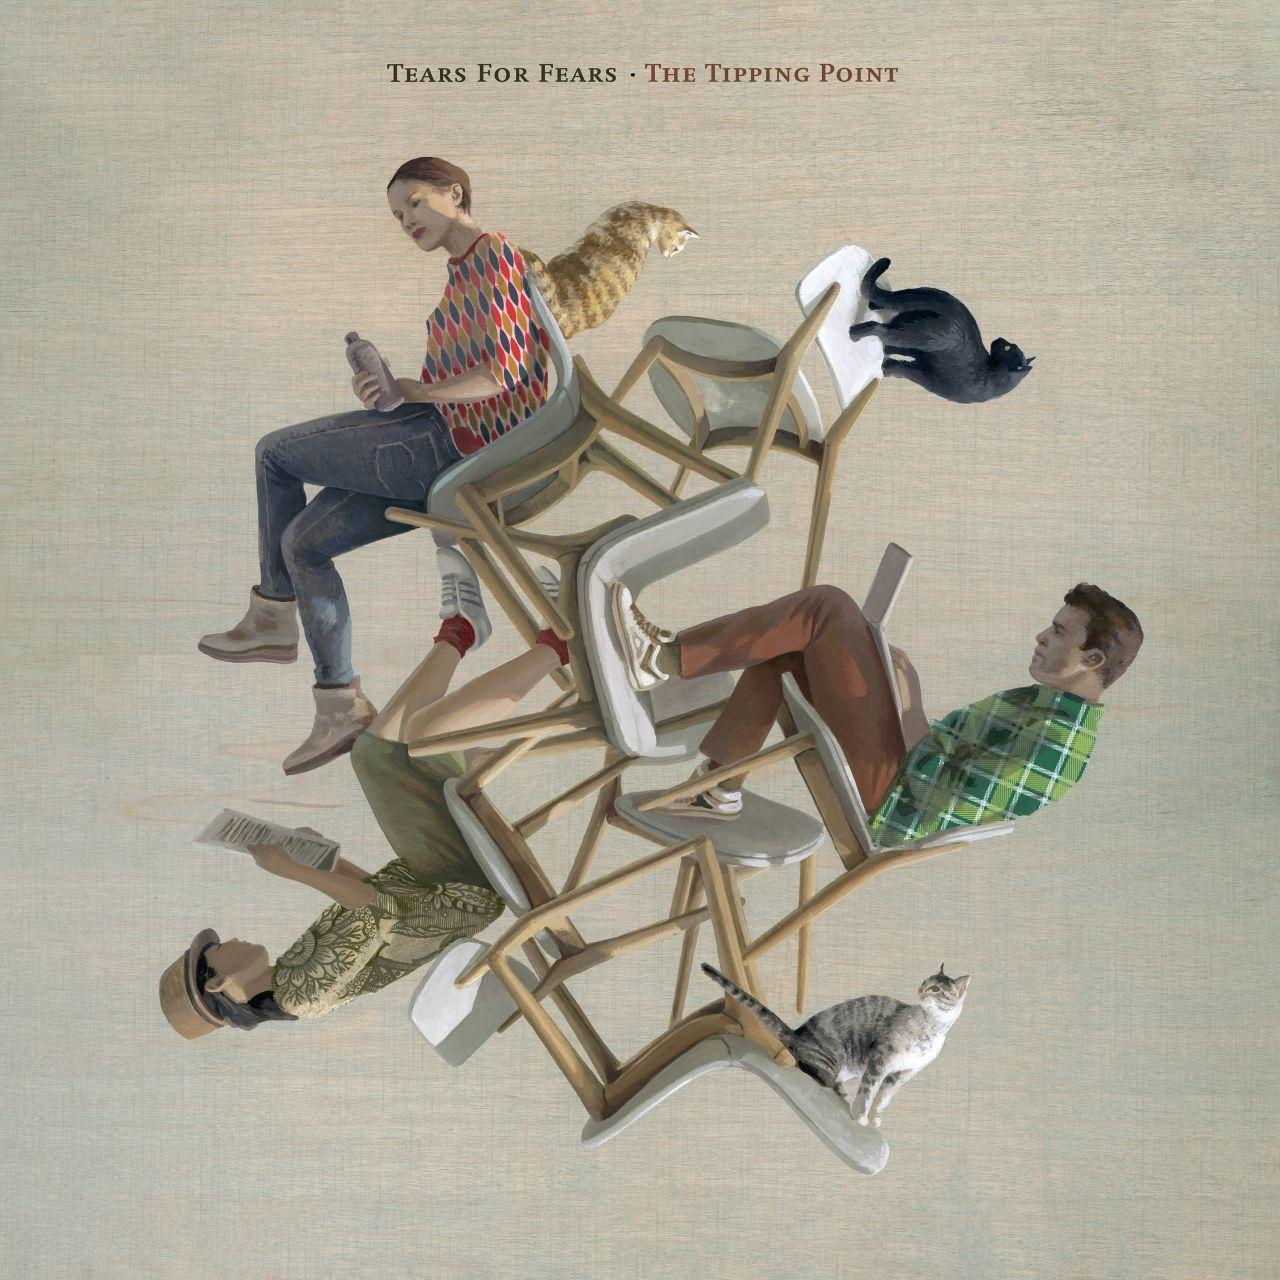 For Tipping Point - Tears Fears The (CD) -